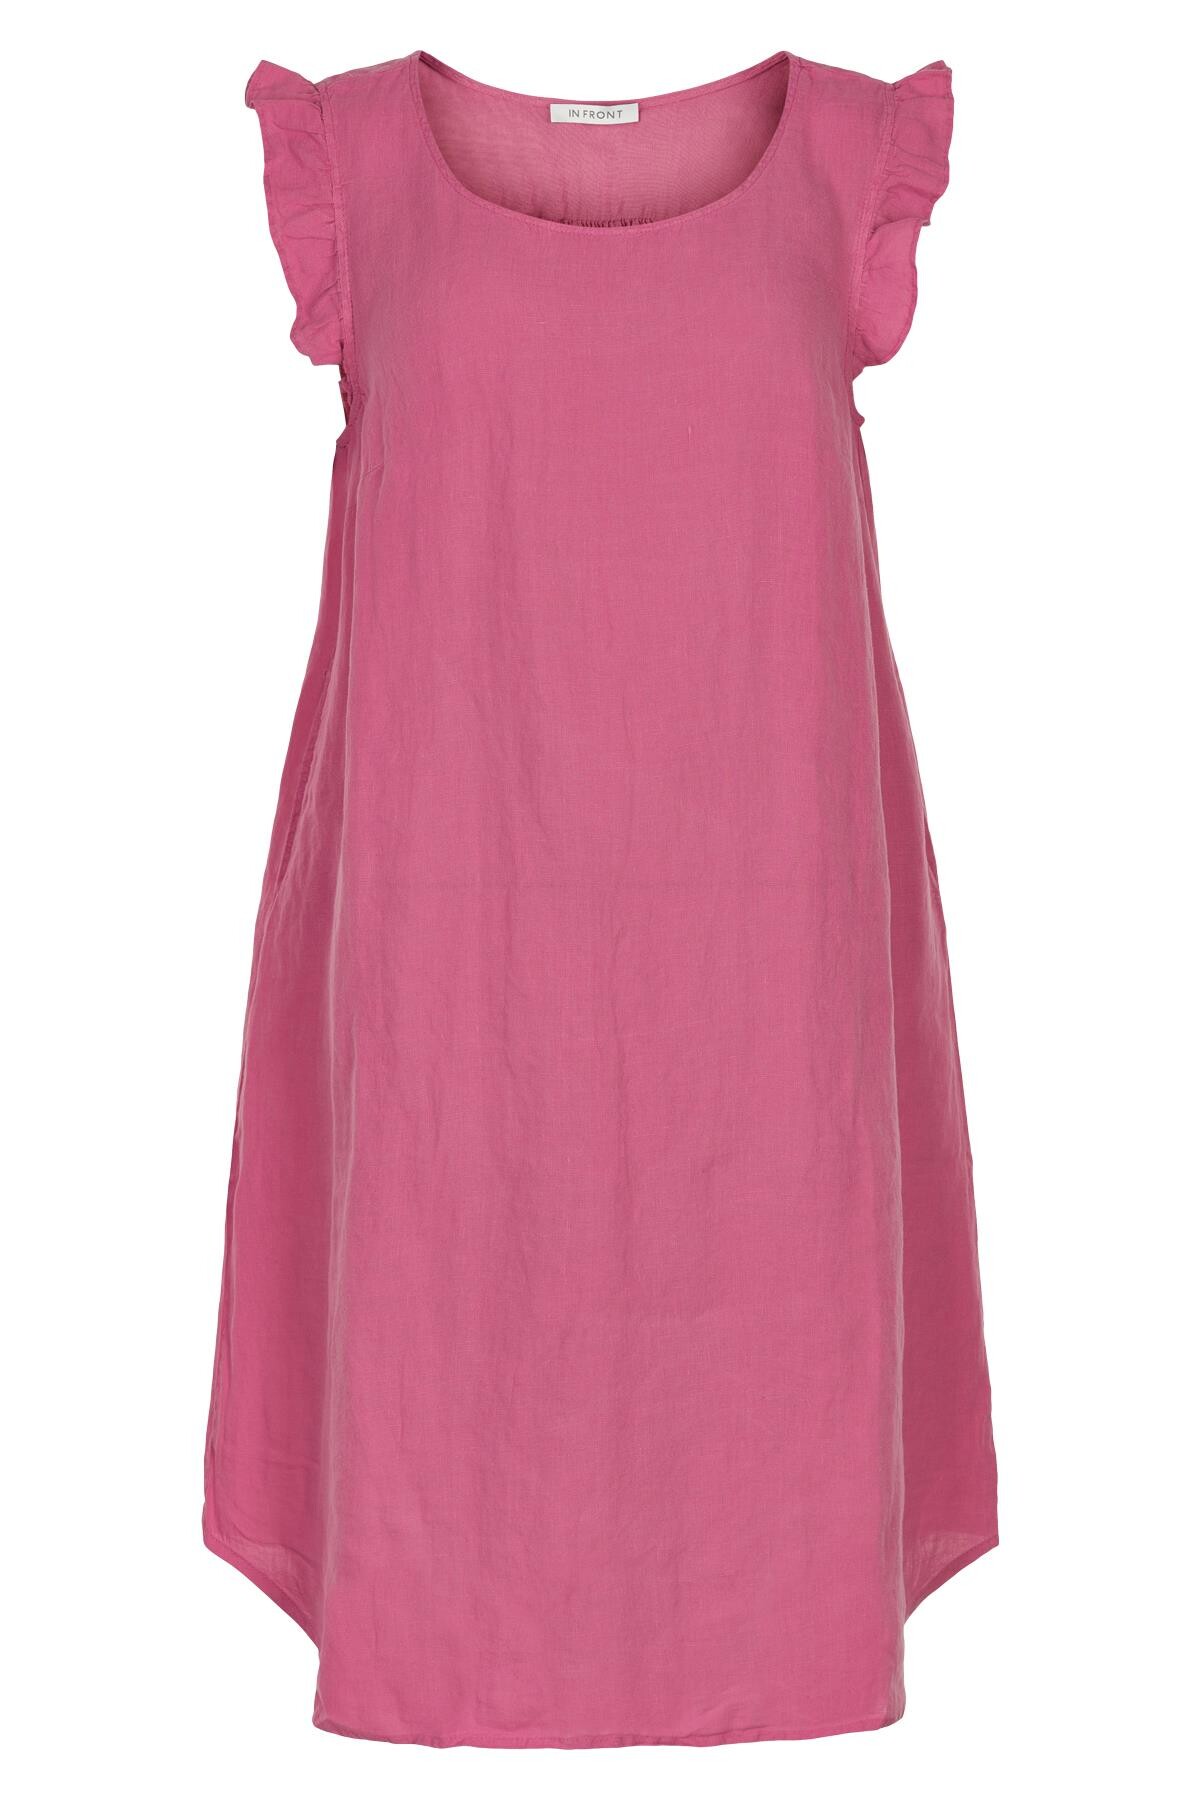 IN FRONT LINO DRESS 15071 221 (Pink 221, M)